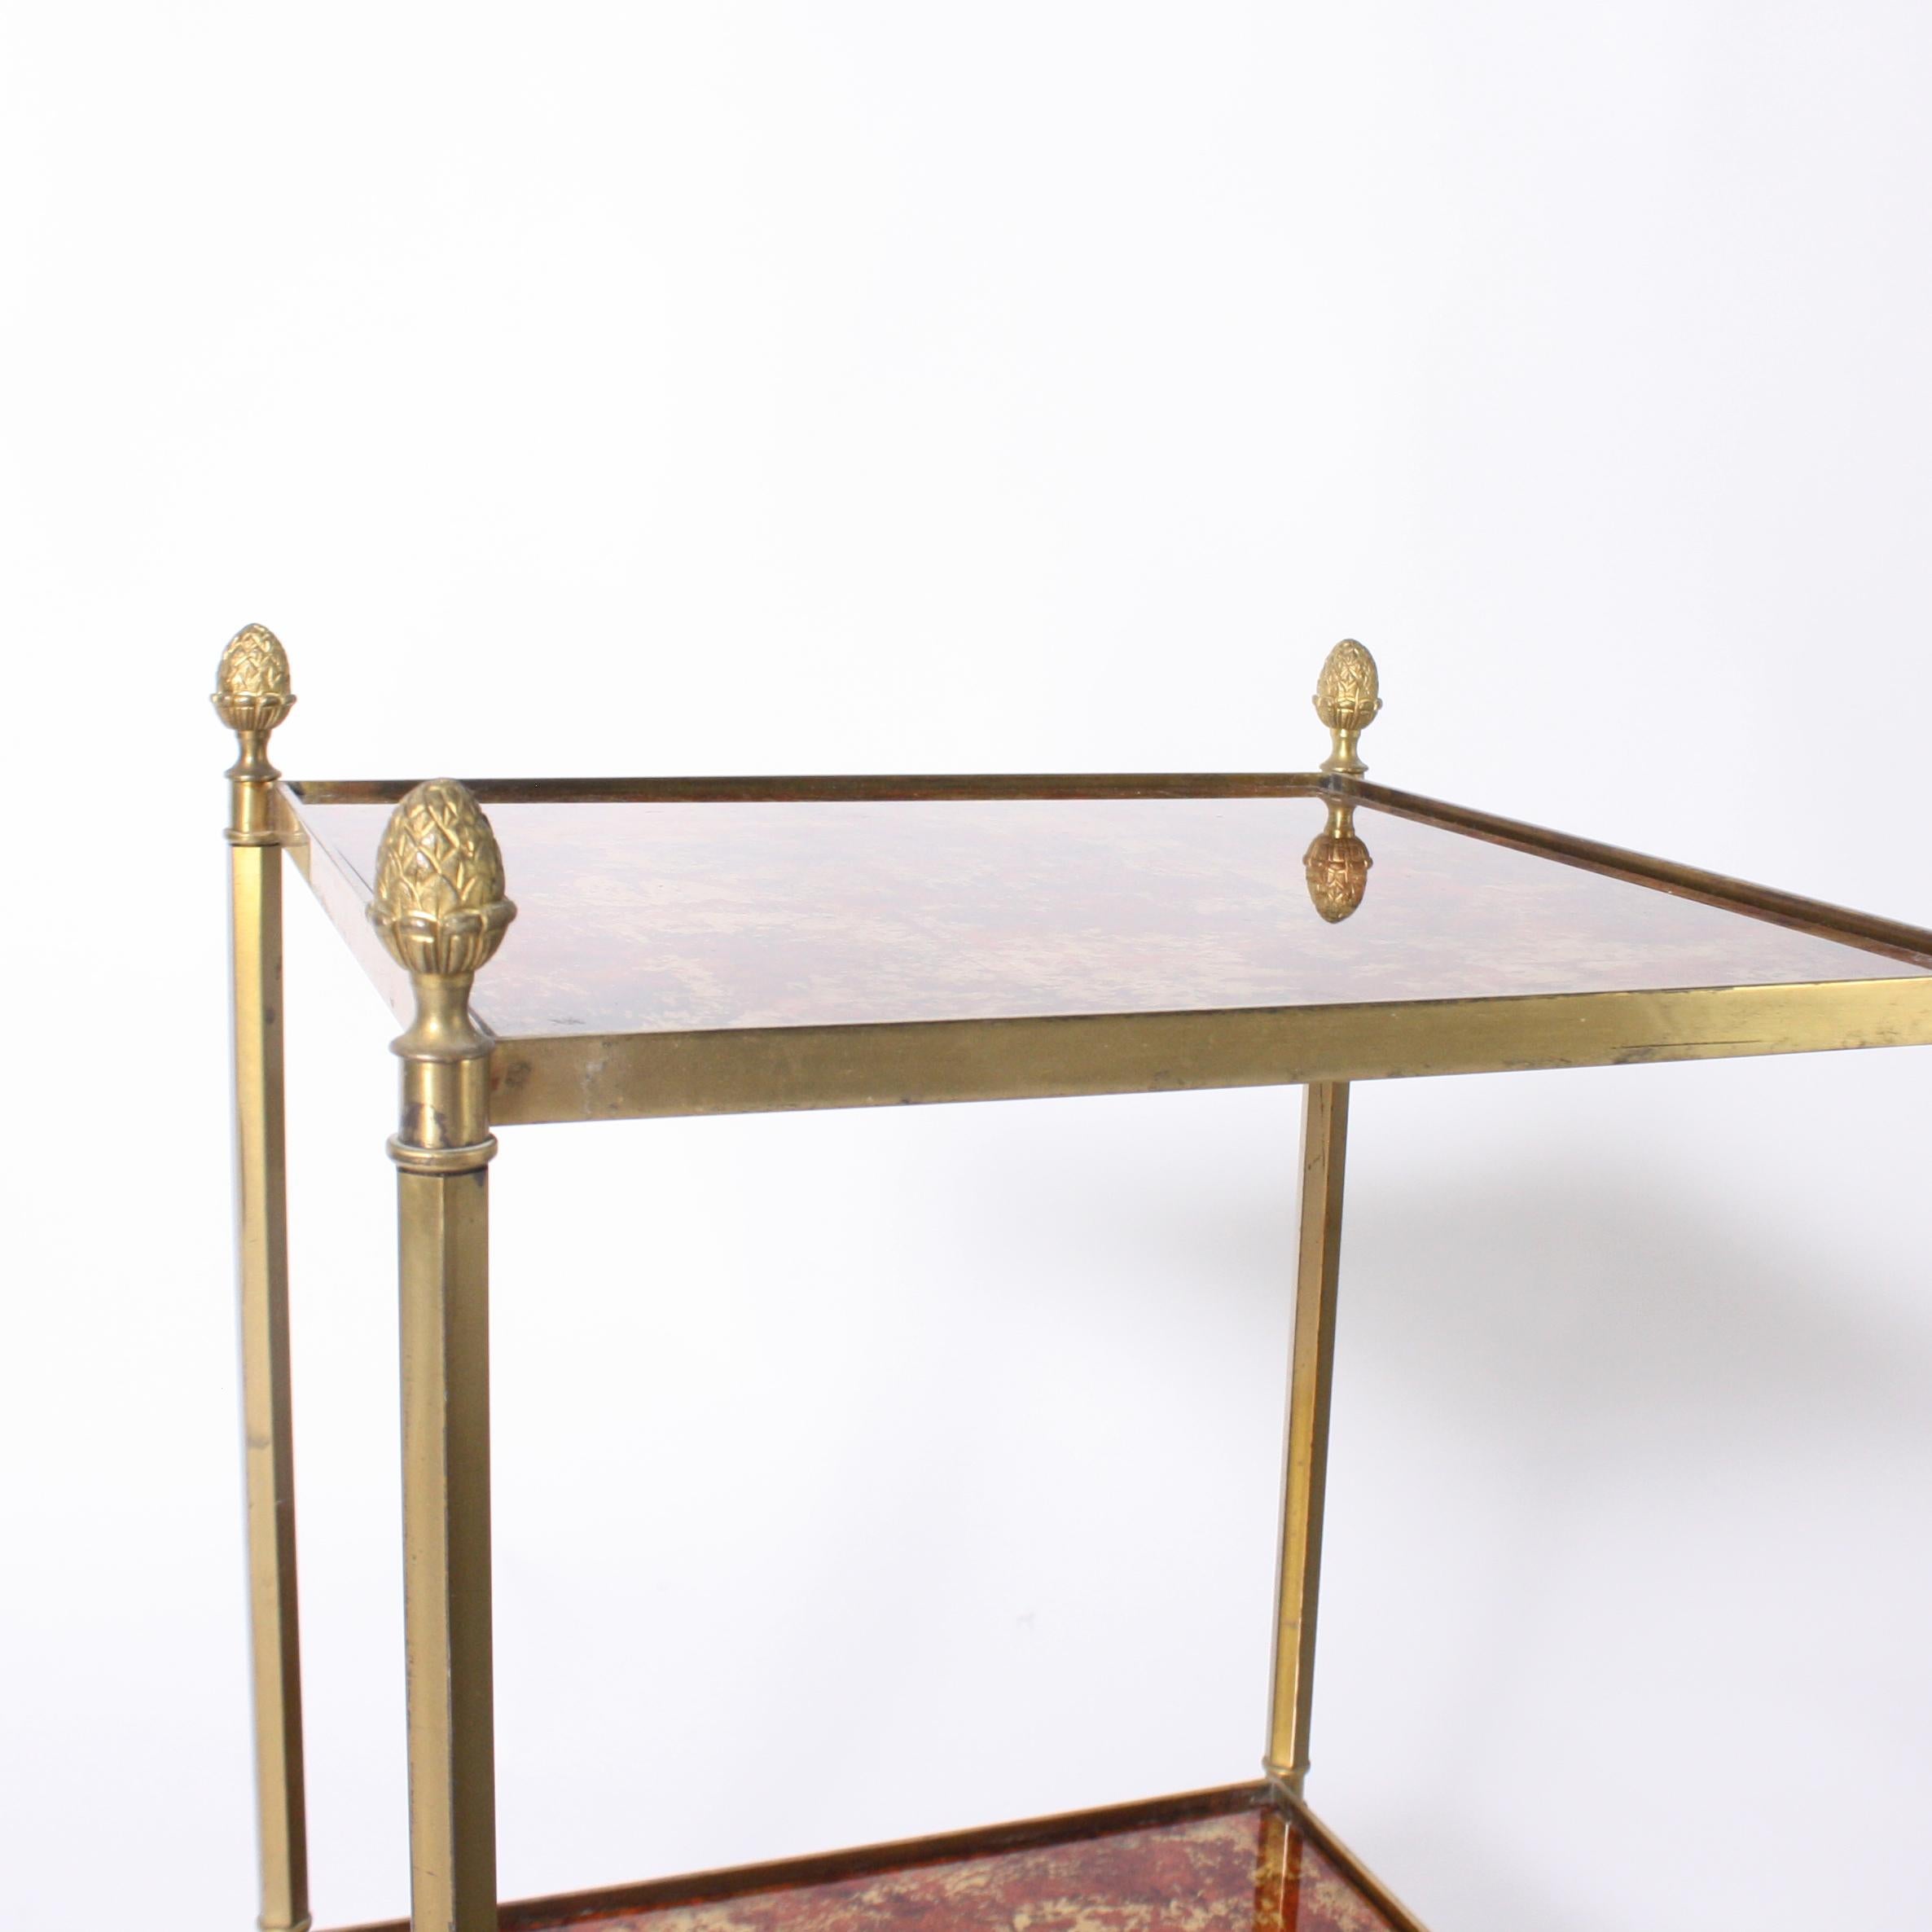 Pair of brass side tables with reverse painted glass shelves, circa 1950.
 